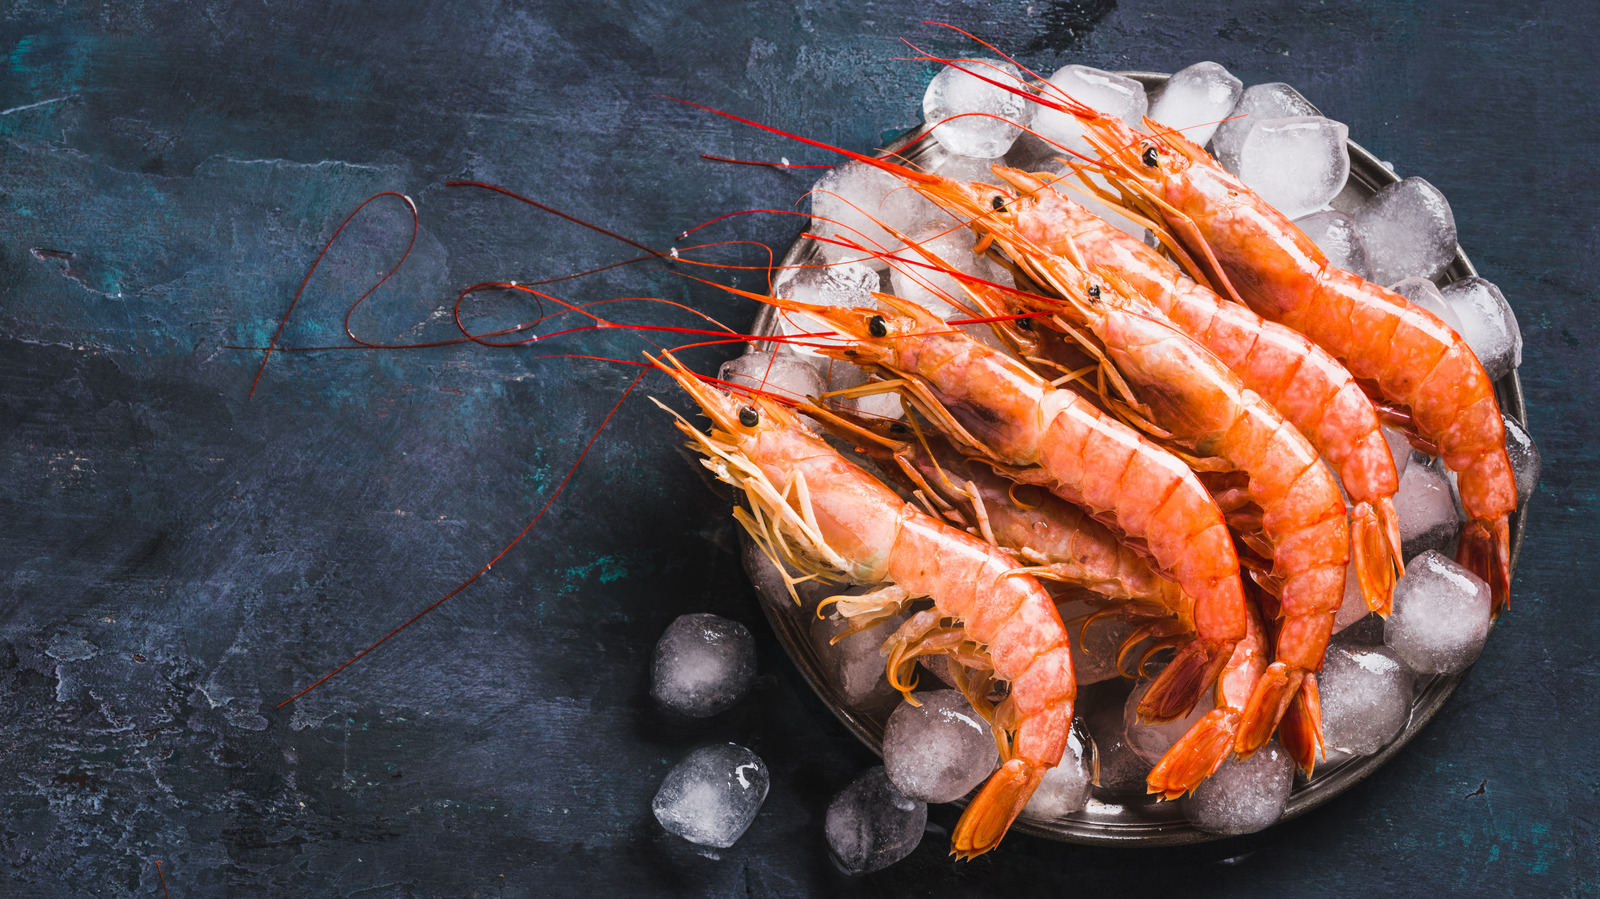 Prawns vs. Shrimp: When to Cook with Each & How They're Different